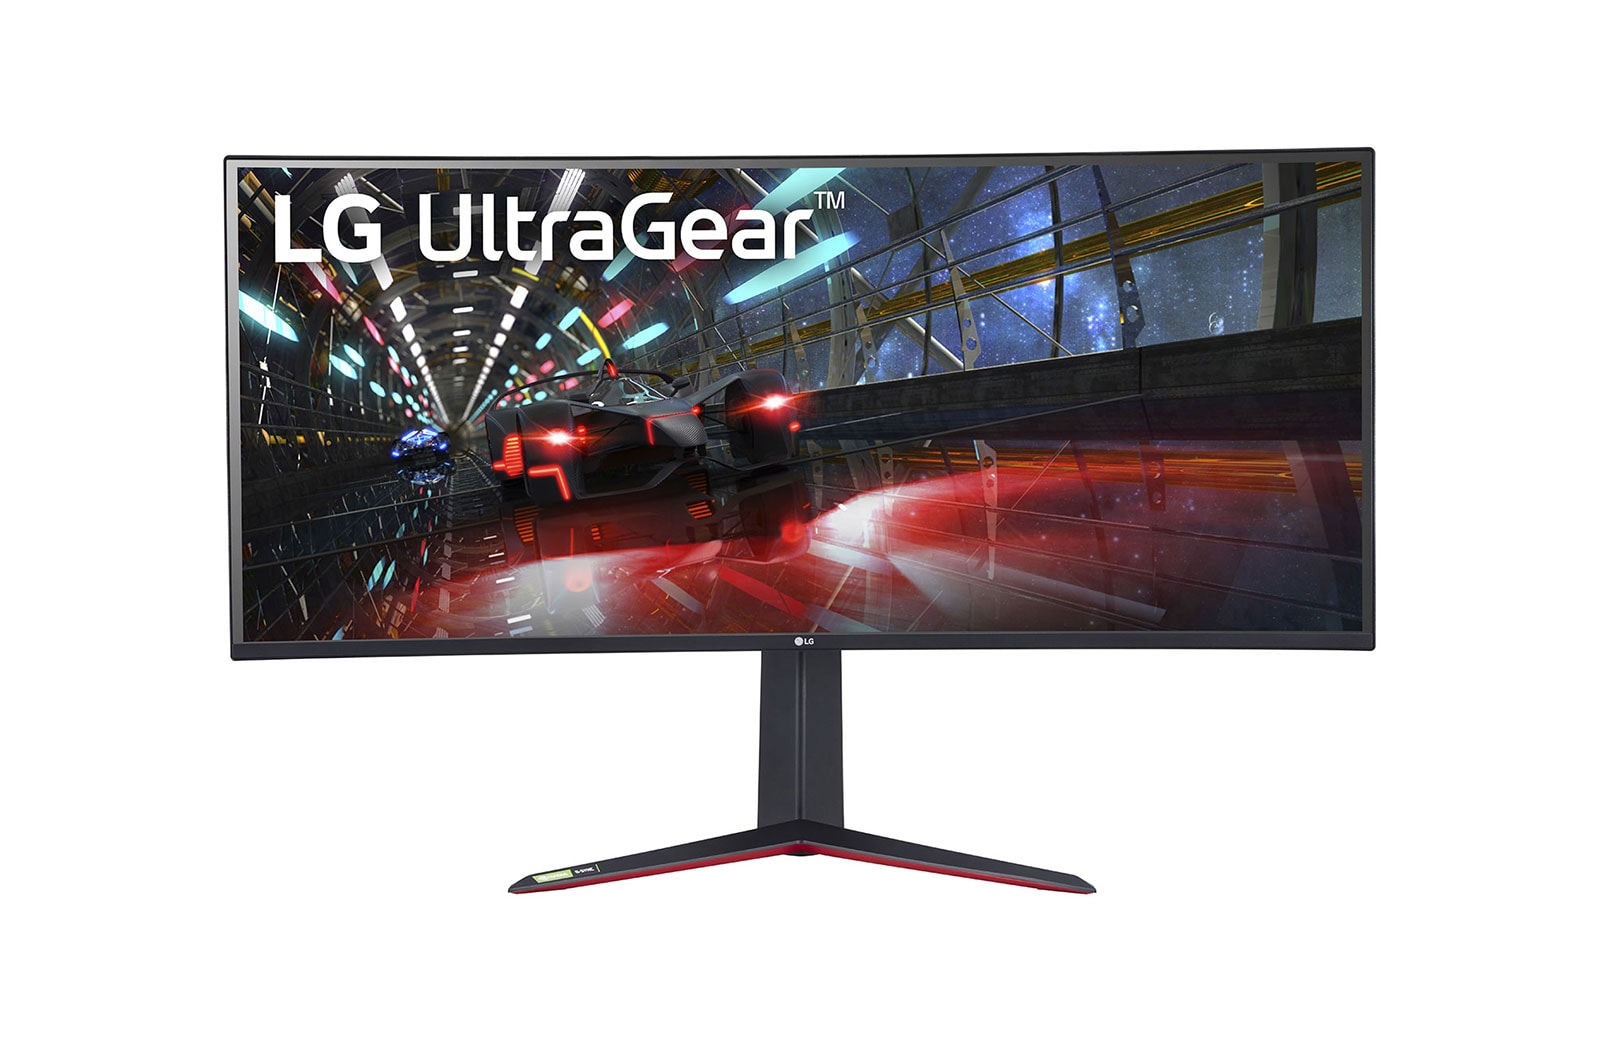 LG 38” UltraGear Curved WQHD+ Nano IPS 1ms 144Hz HDR 600 Monitor with G-SYNC® Compatibility, 38GN950-B